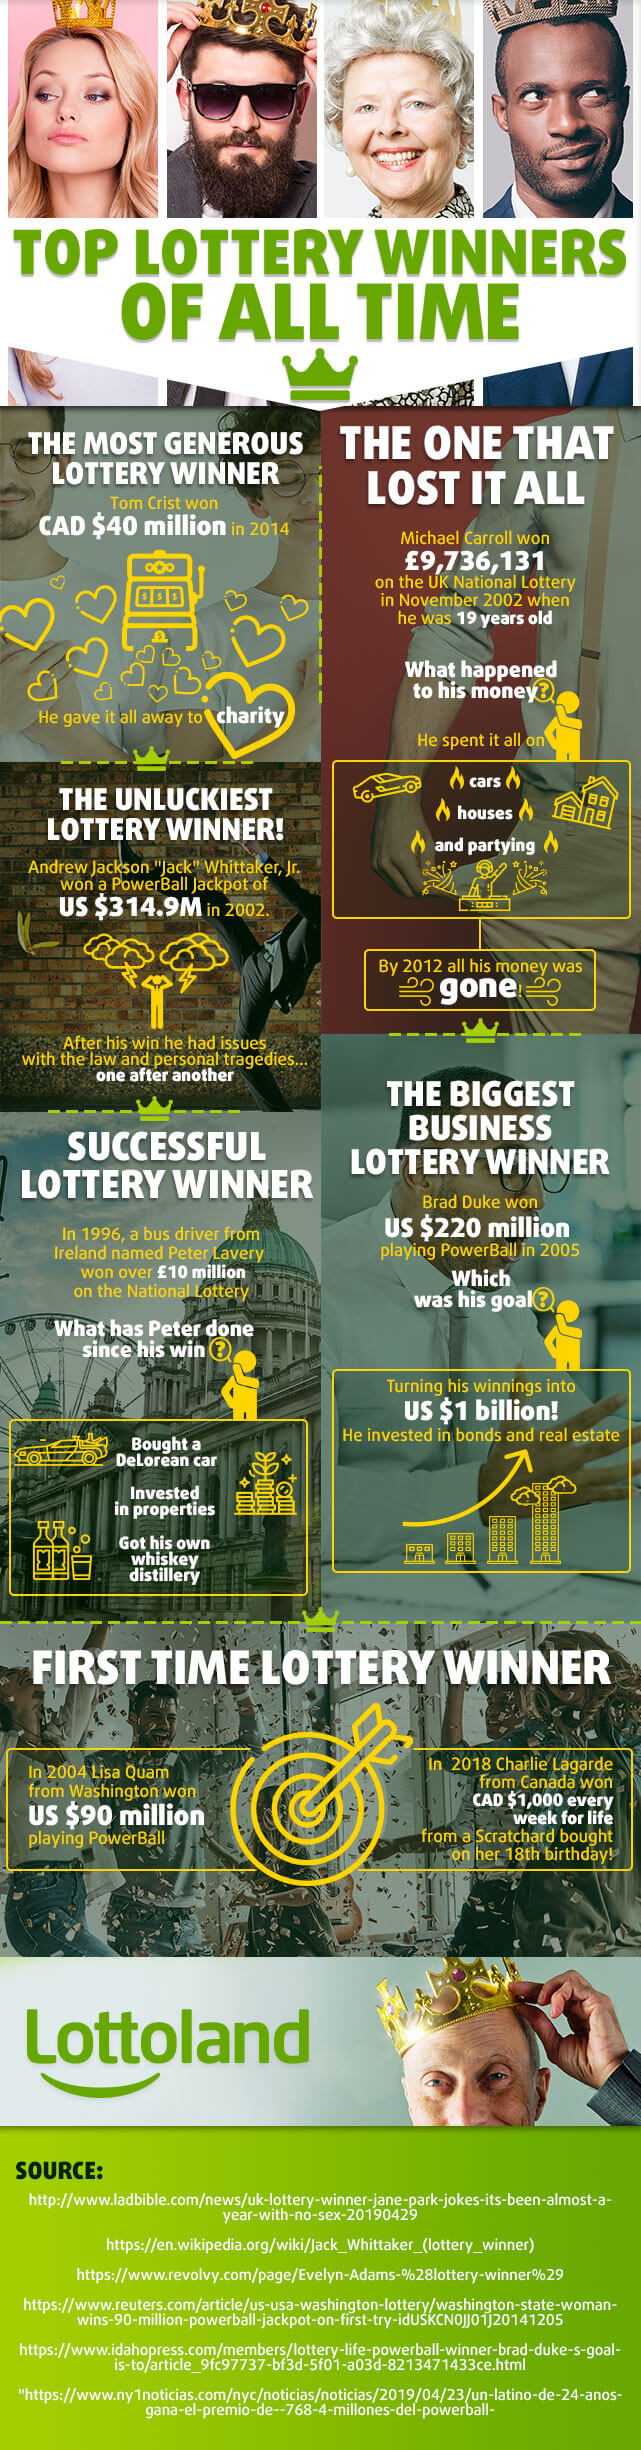 Infographic about top lottery winners